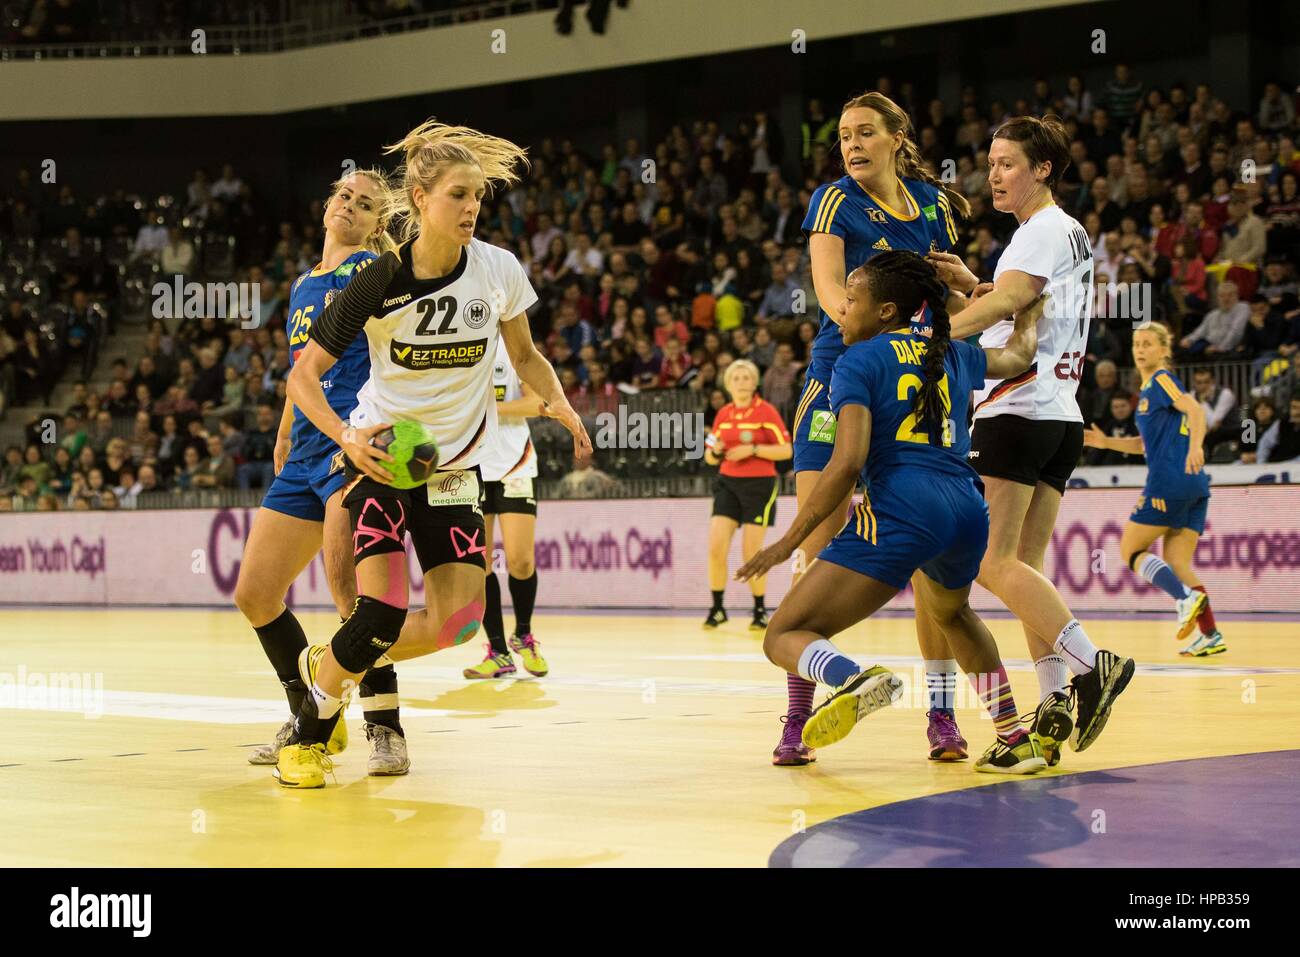 March 20, 2015: Susan Muller #22 of Germany National Team  and Dafe Edijana #21 of Sweden National Team  in action during the women's Carpathian Trophy handball tournament match between Sweden and Germany at "Polyvalent Hall" Cluj Napoca, Romania ROU.   Photo: Cronos/Catalin Soare Stock Photo